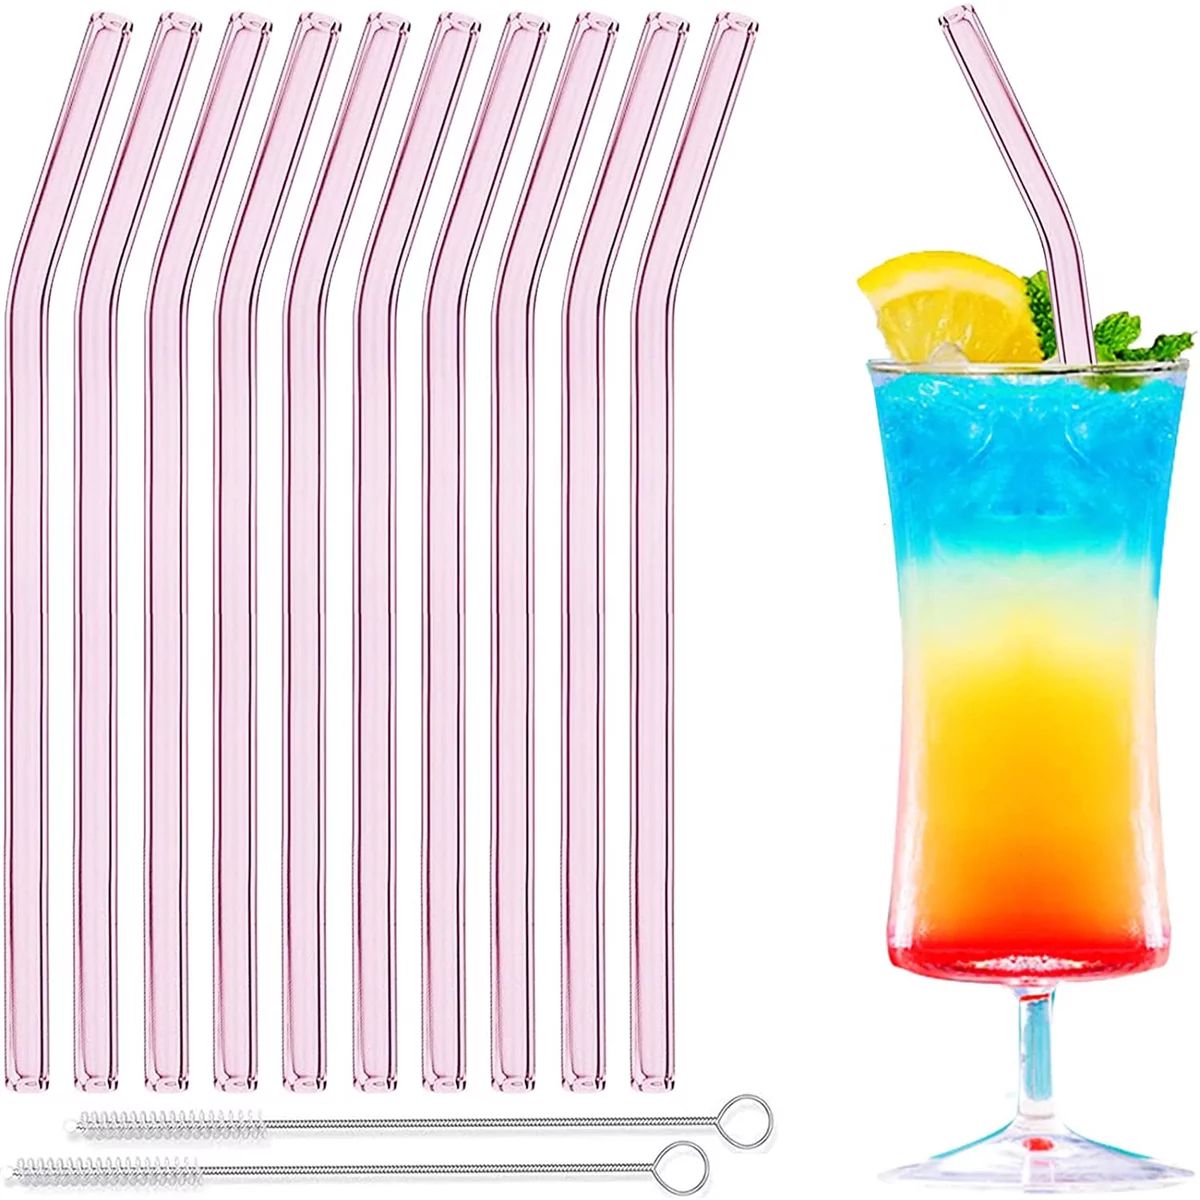 Glass Straw - 10pcs Pink Bent Glass Straw Set, 8'' Reusable Straws With Cleaning Brush For Tumble... | Walmart (US)